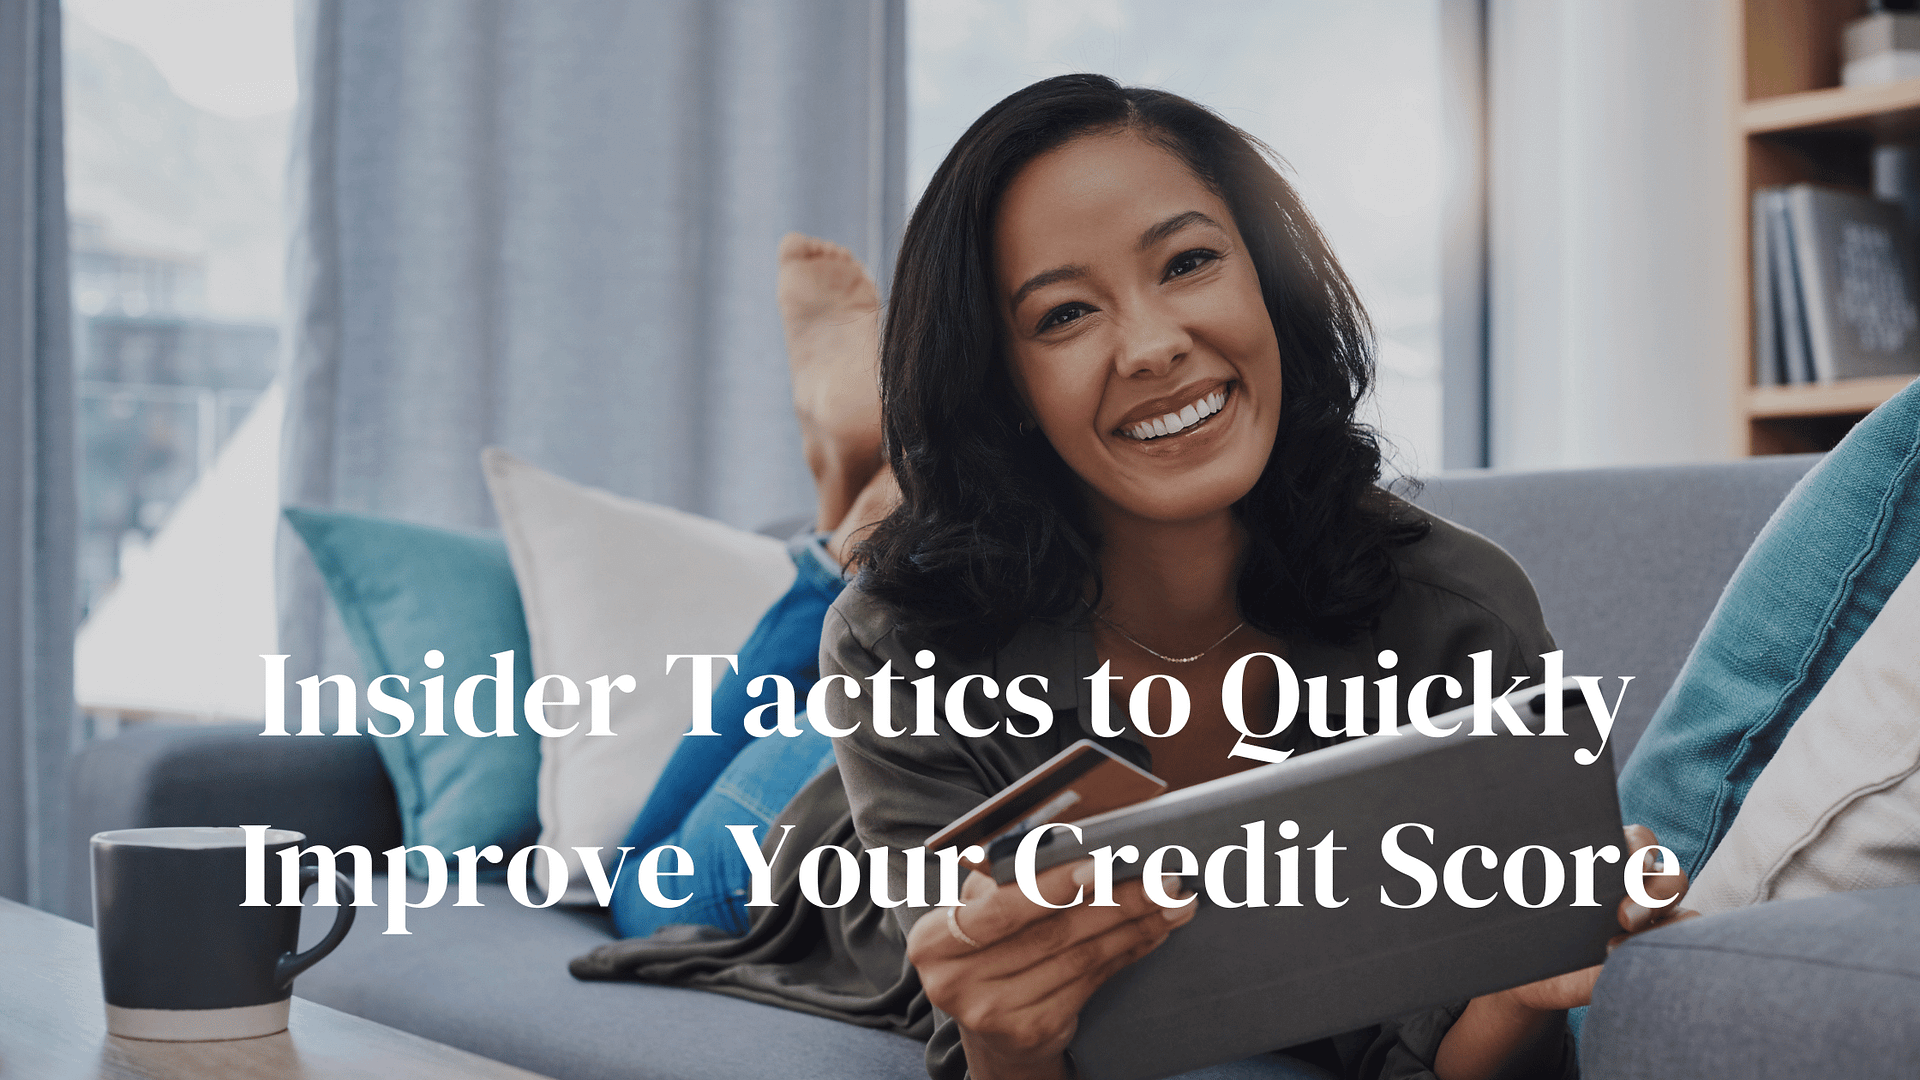 Insider Tactics to Quickly Improve Your Credit Score